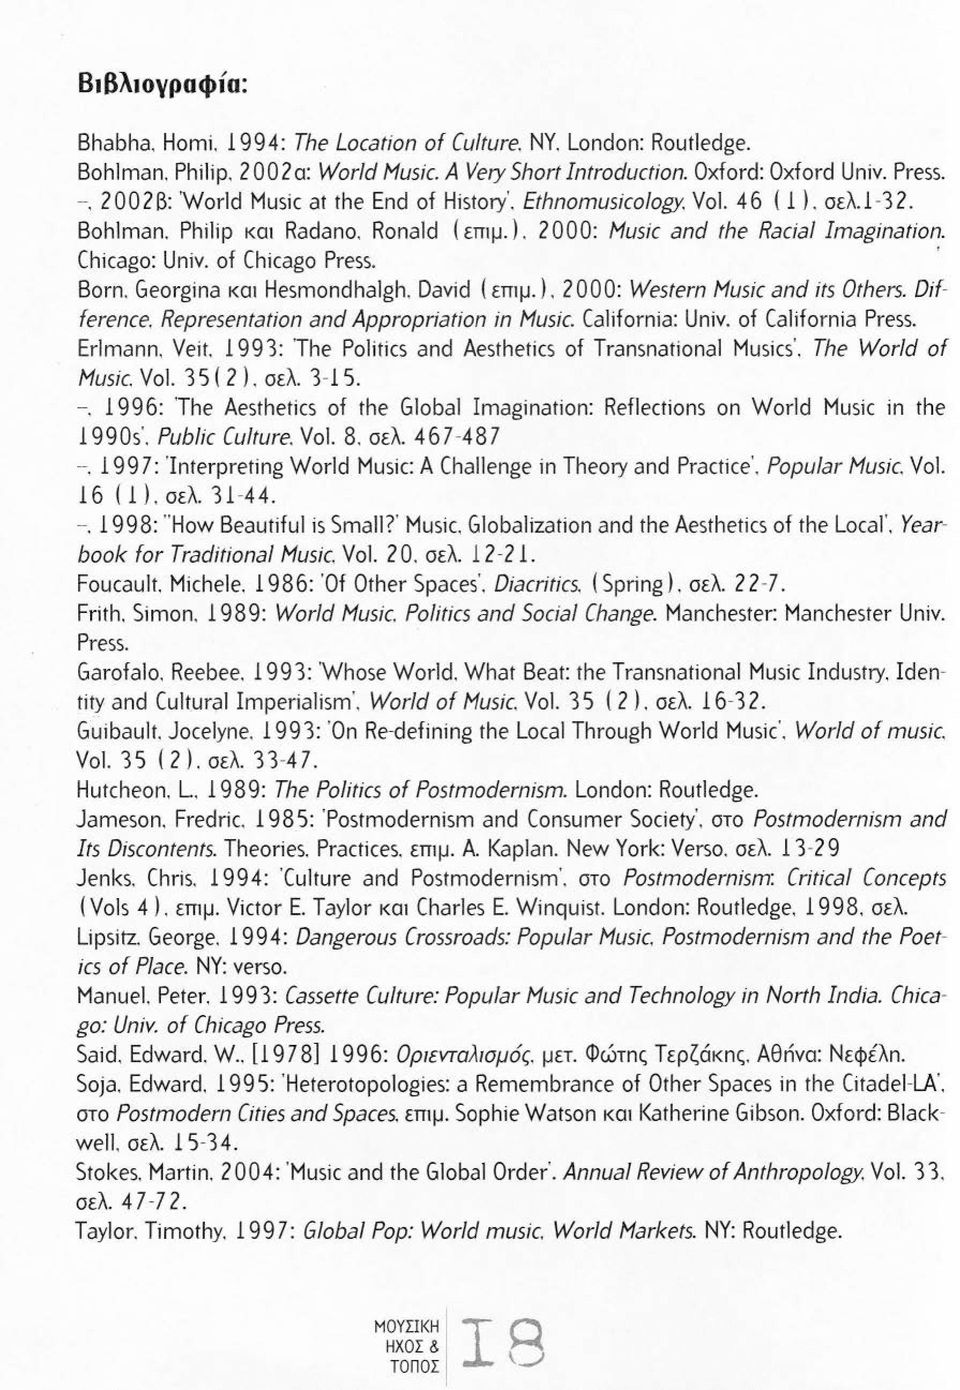 of Chicago Press. Born. Georgina κα Hesmondhalgh. David ( επψ. ). 2 Ο Ο Ο: Western Music and its Others. Difference. Representation and Appropriation in Music. California: Univ. of California Press.